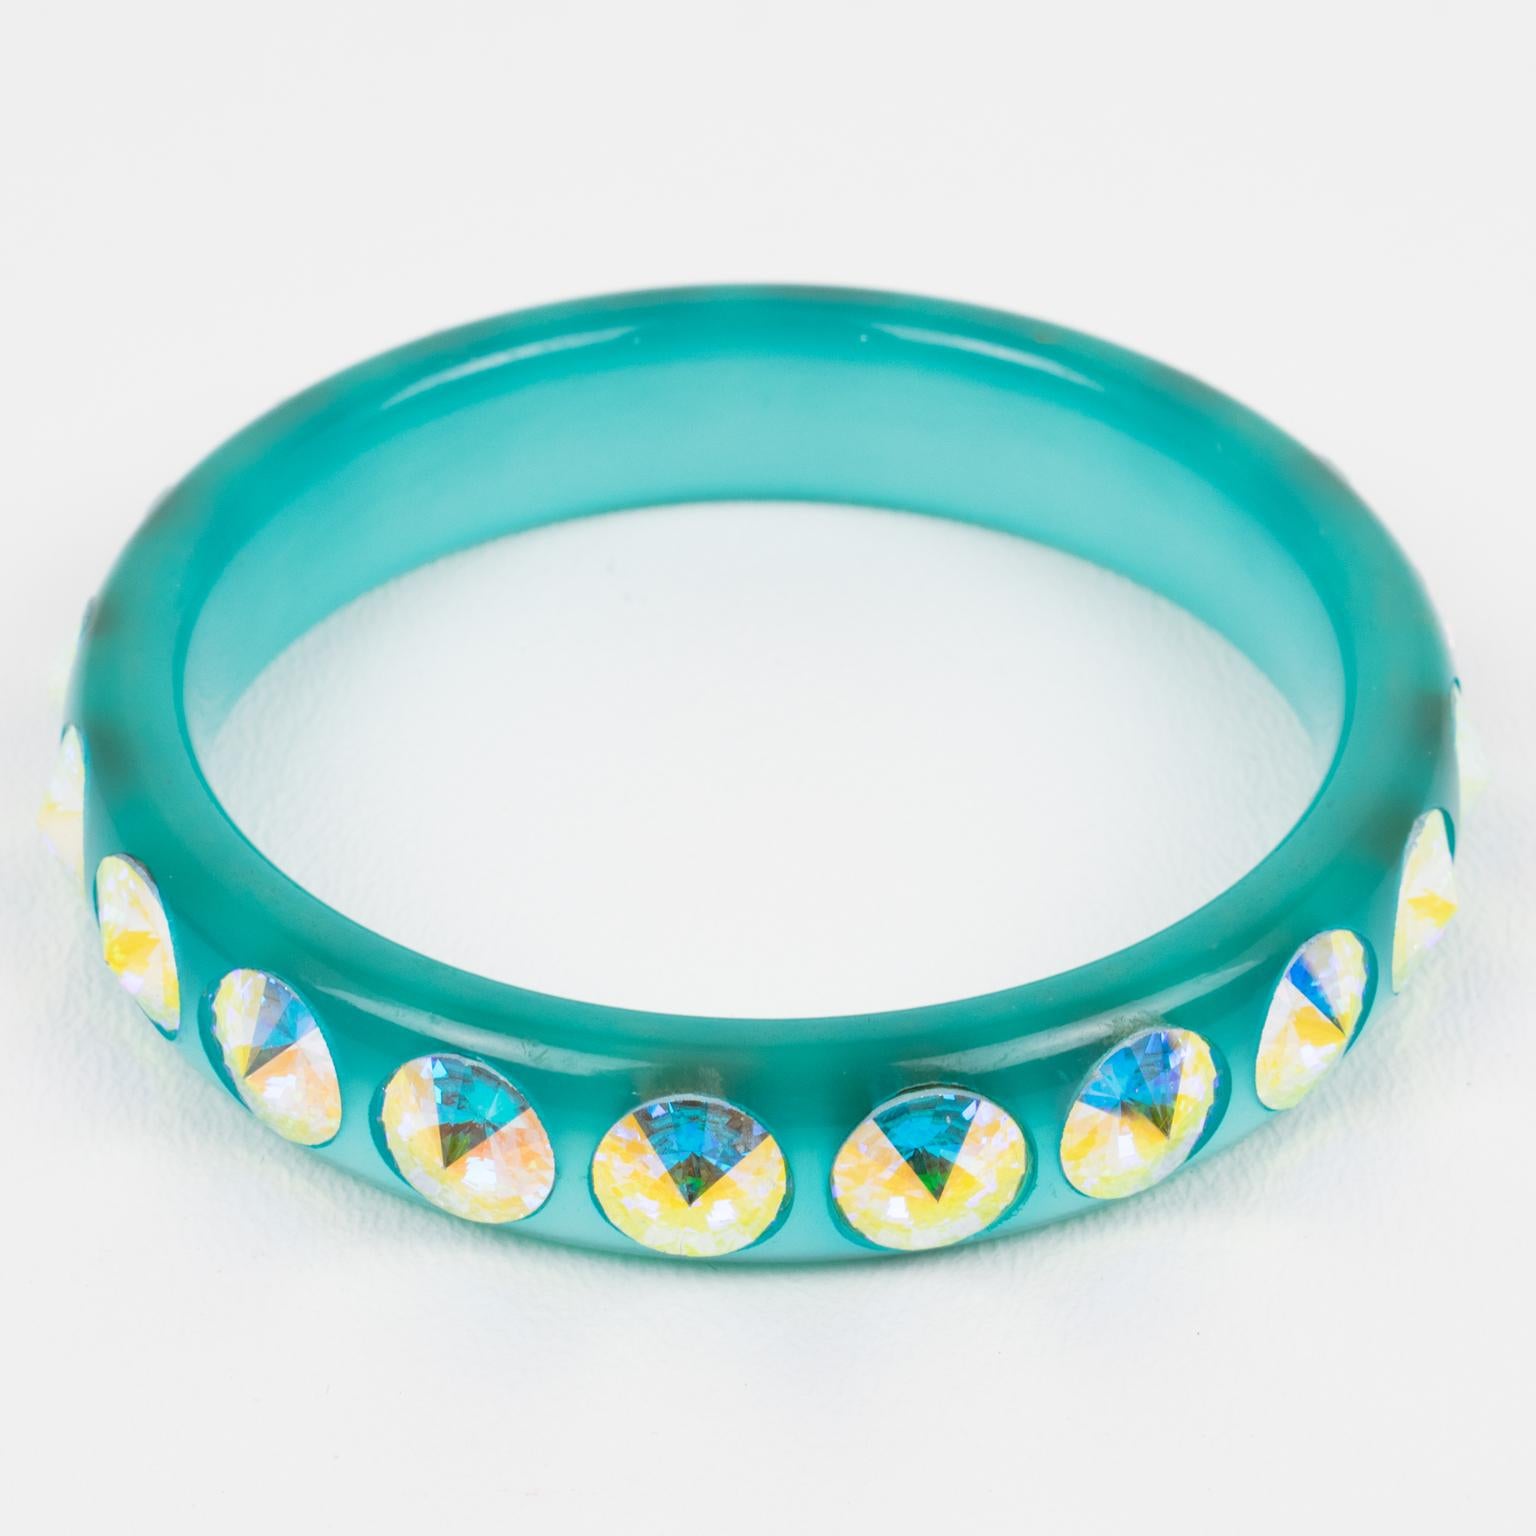 This gorgeous Lucite bracelet bangle features a domed shape in a turquoise blue color. The bangle is ornate with massive Aurora Borealis AB glitter crystal rhinestones. There is no visible maker's mark.
Measurements: Inside across is 2.57 in